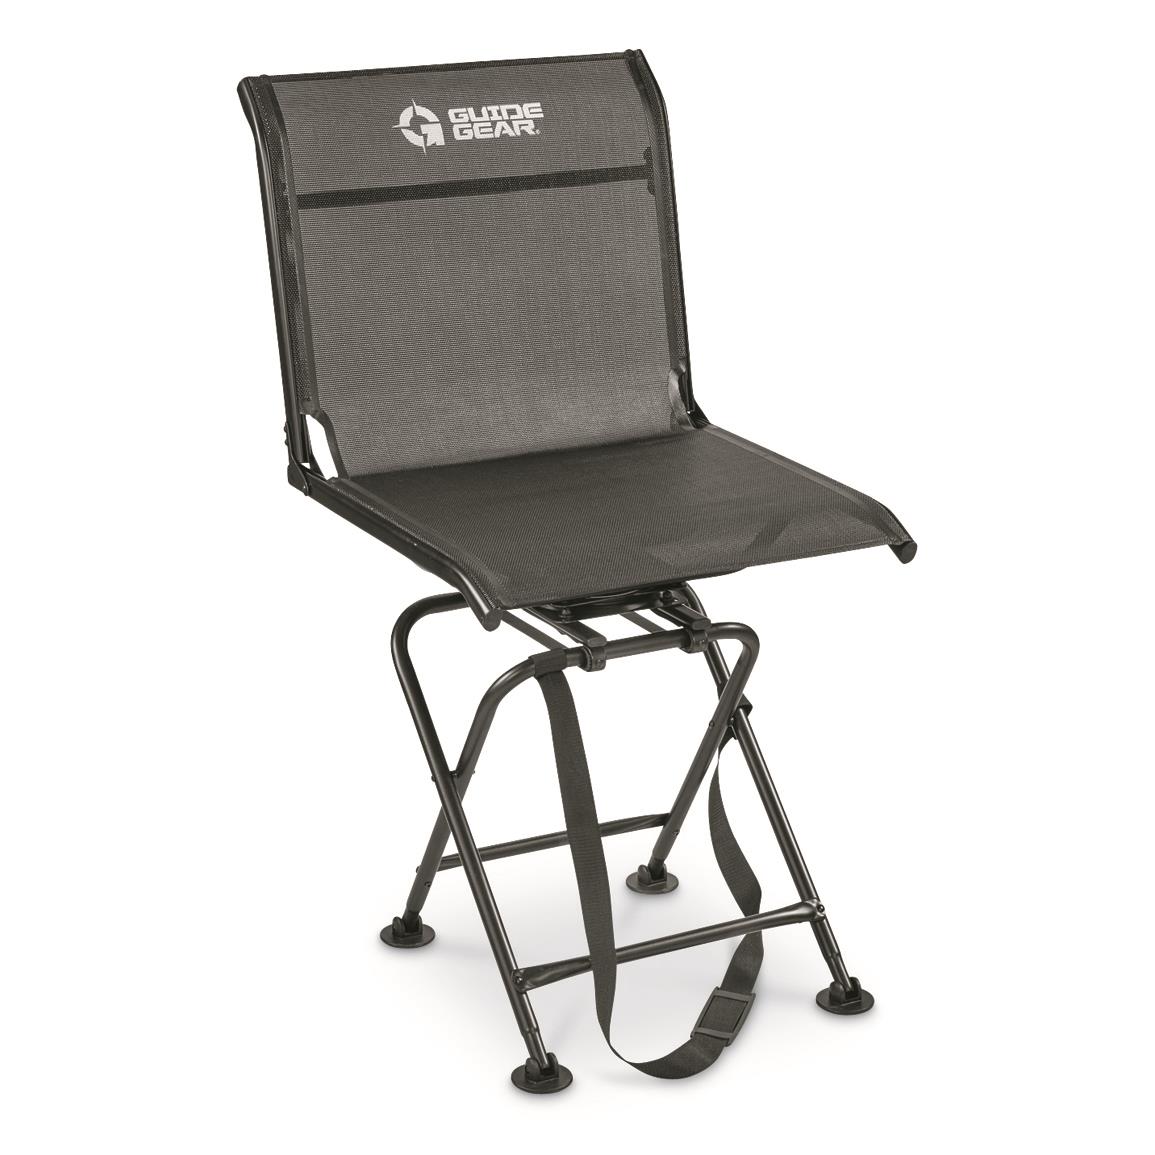 Guide Gear Big Boy Oversized 360 Degree Swivel Hunting Blind Chair, 500-lb. Capacity